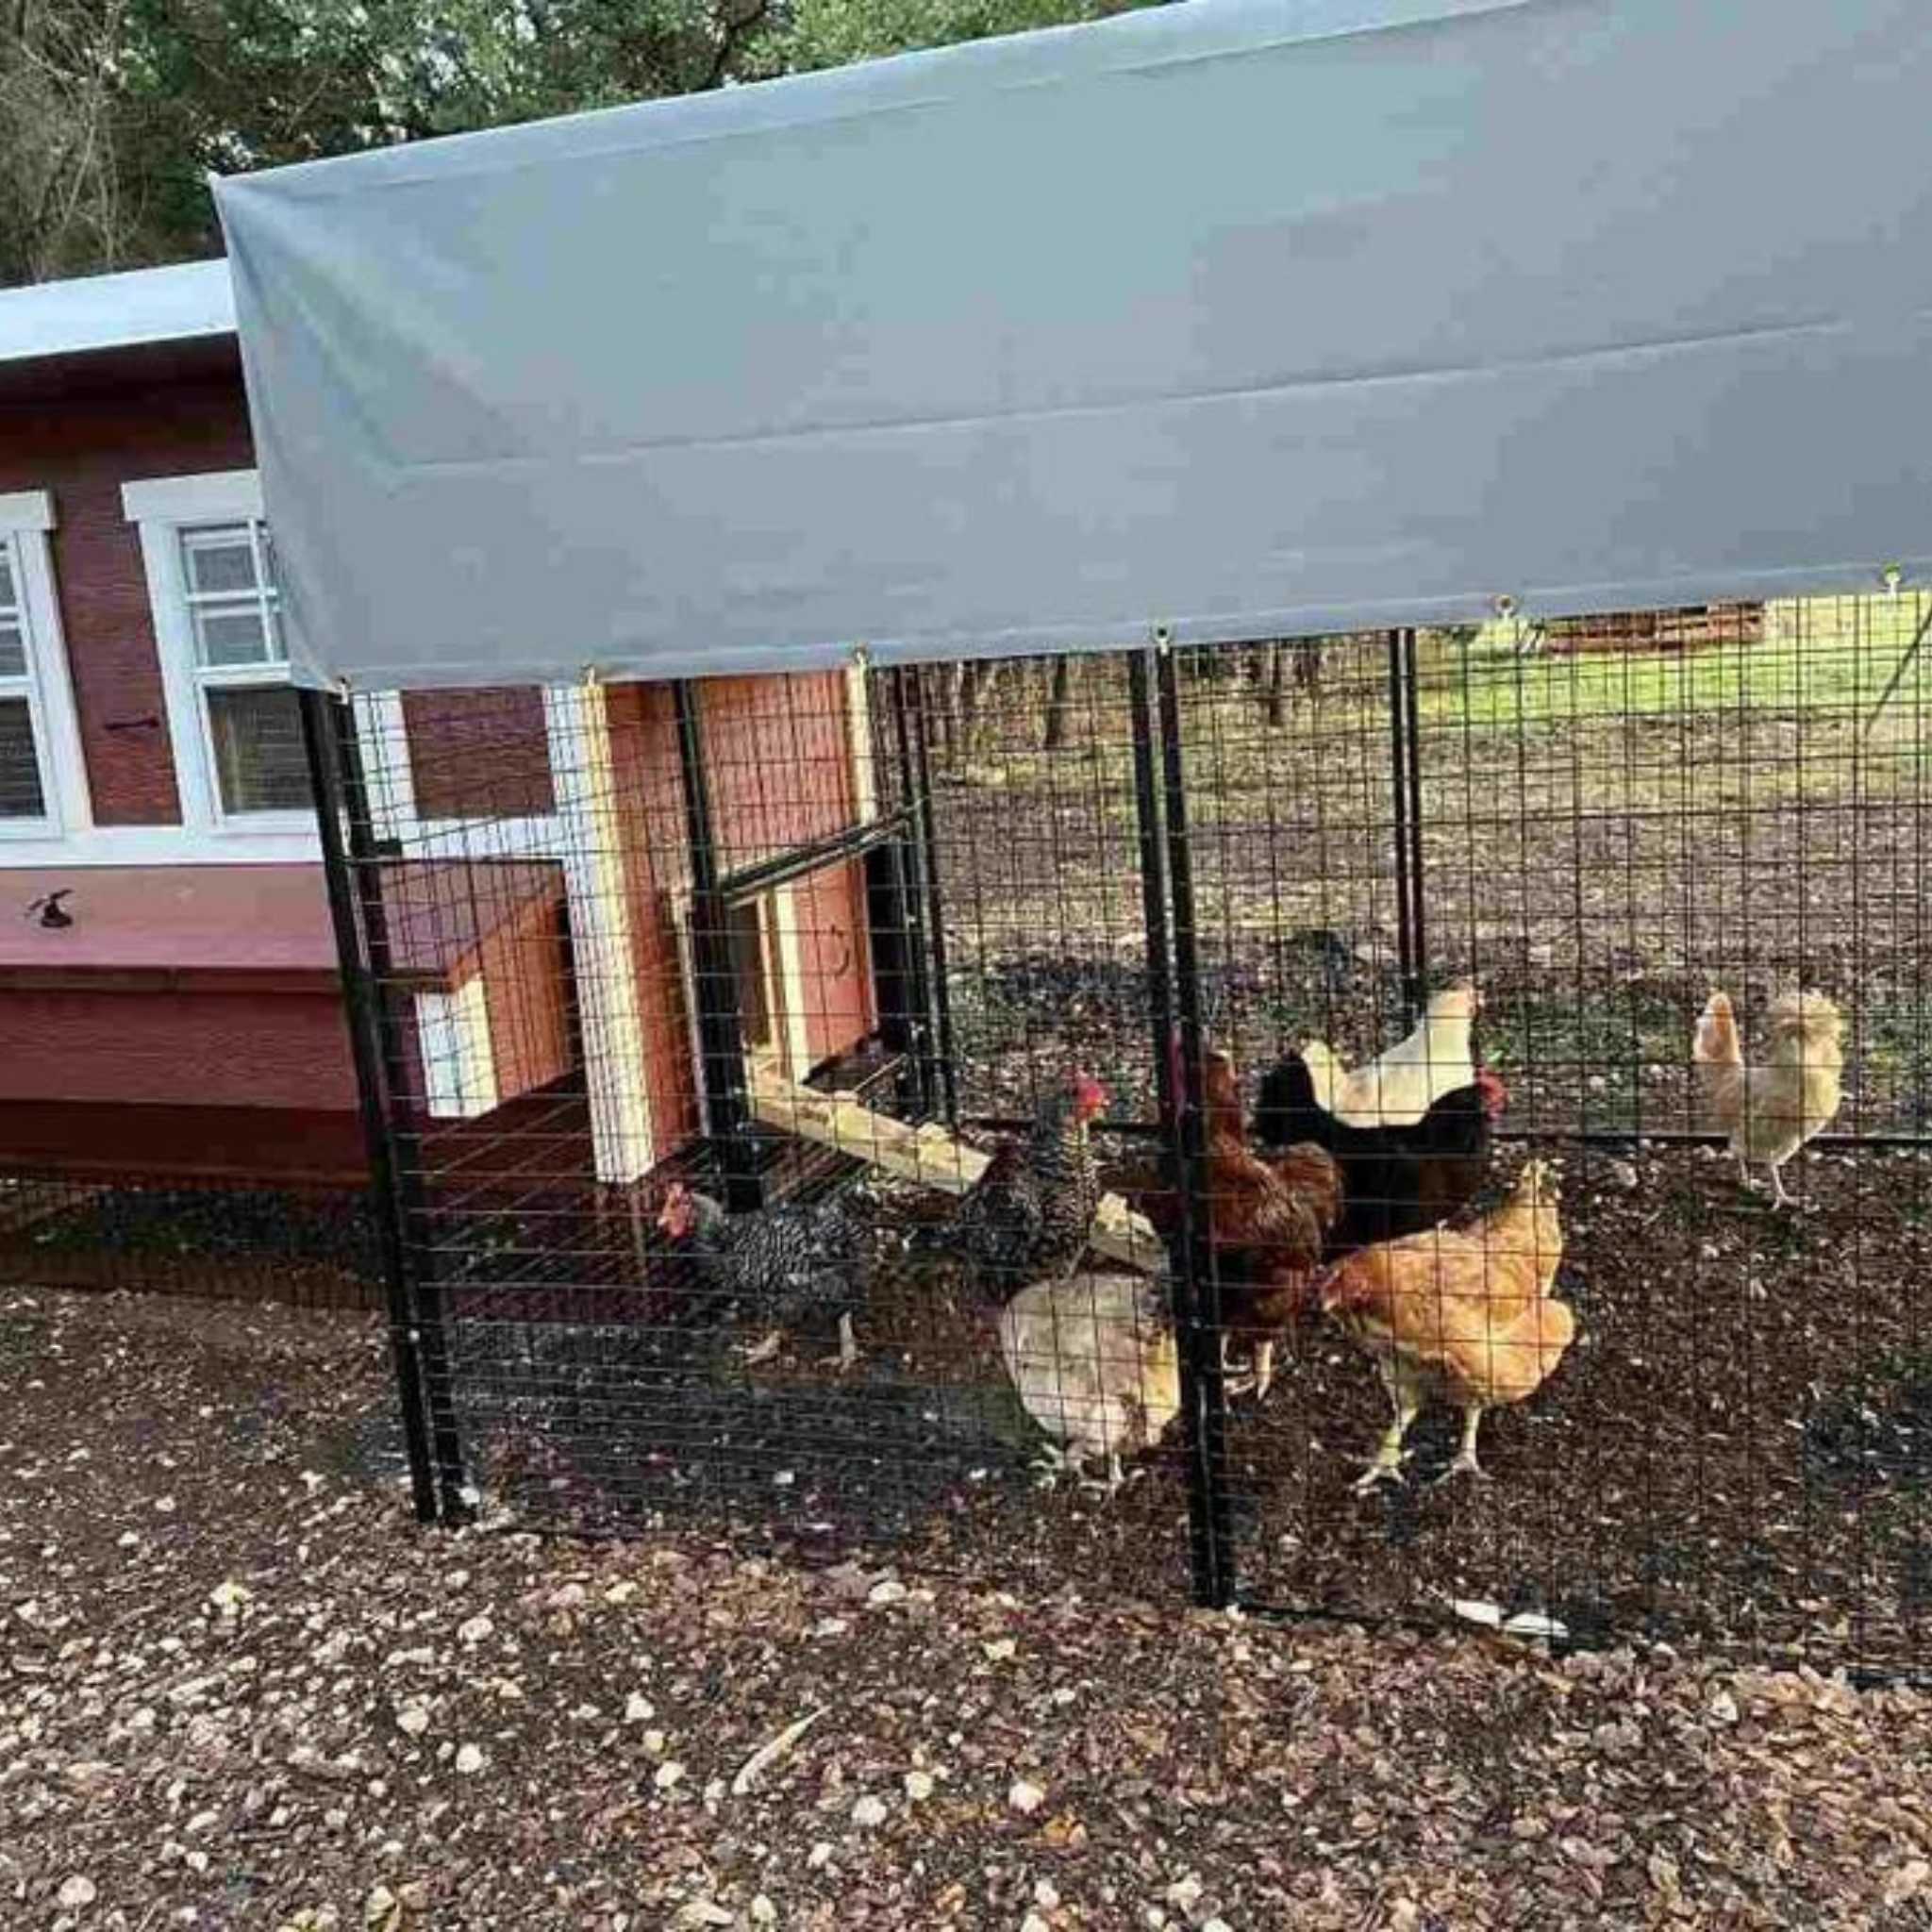 Hatching Time OverEZ. Tarp is shown on top of 8ft chicken run with chickens inside. Chicken run is connected to chicken coop.